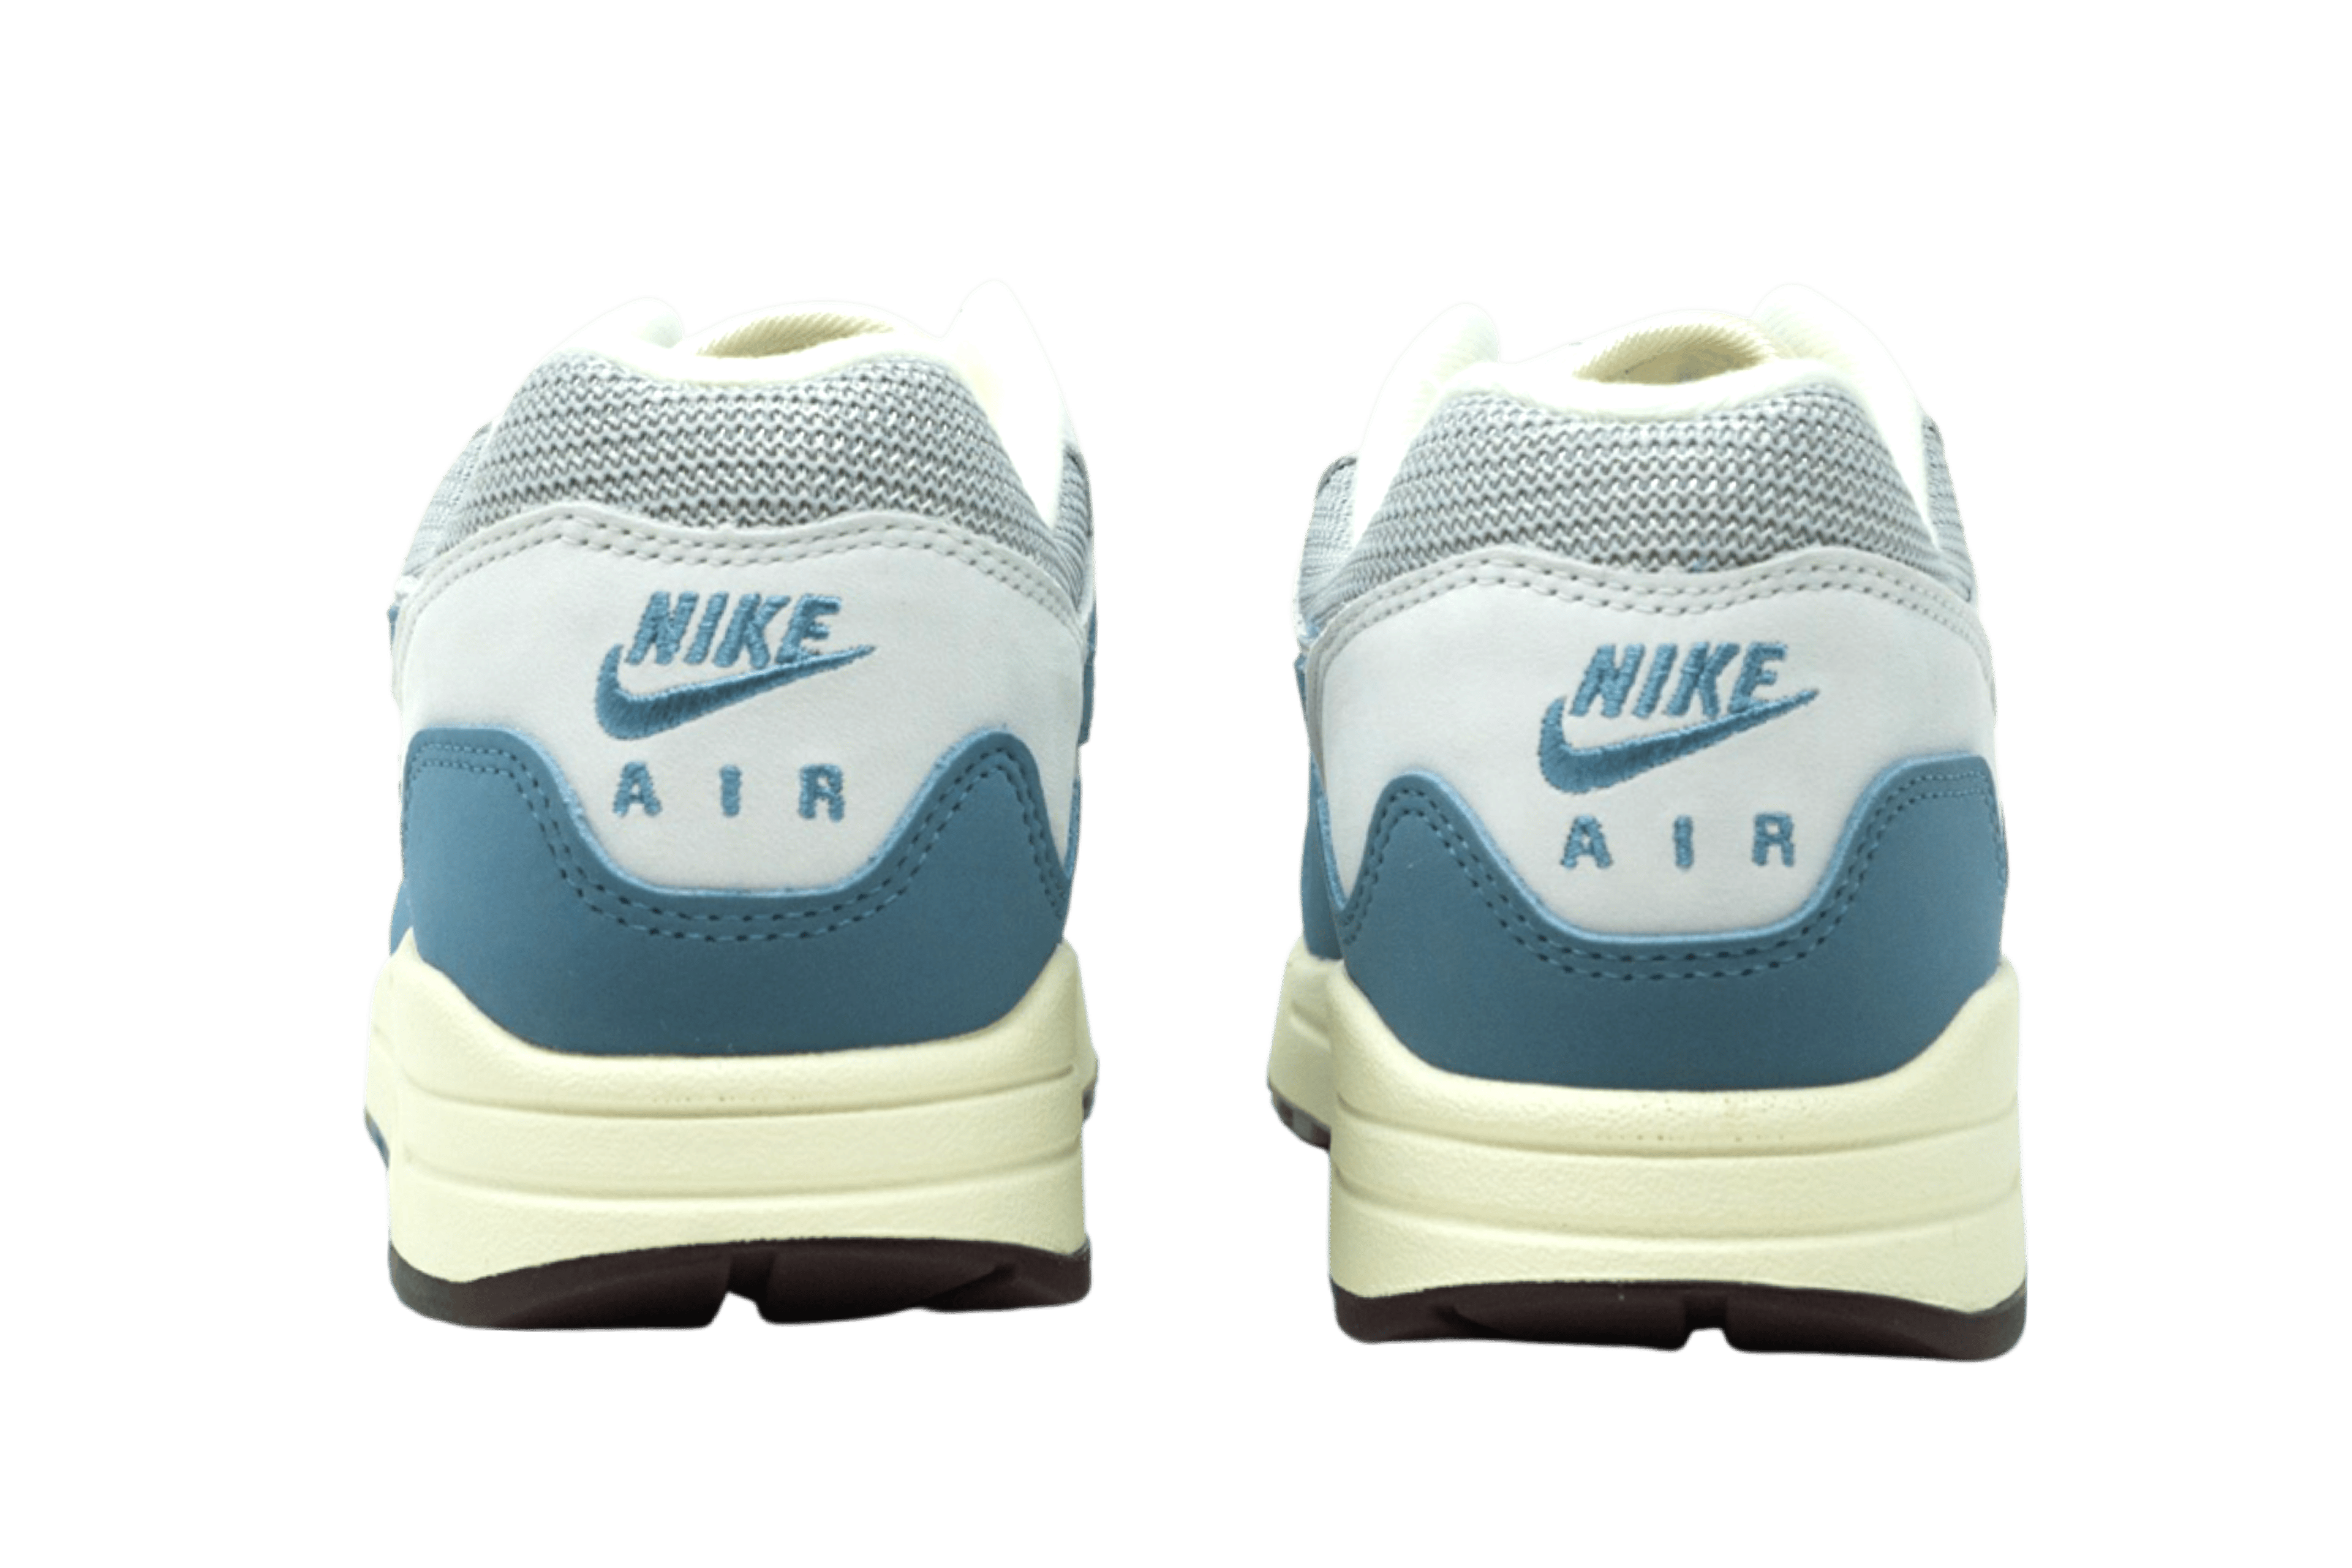 Alternate View 1 of Nike Air Max 1 Patta Waves Noise Aqua (with Bracelet)